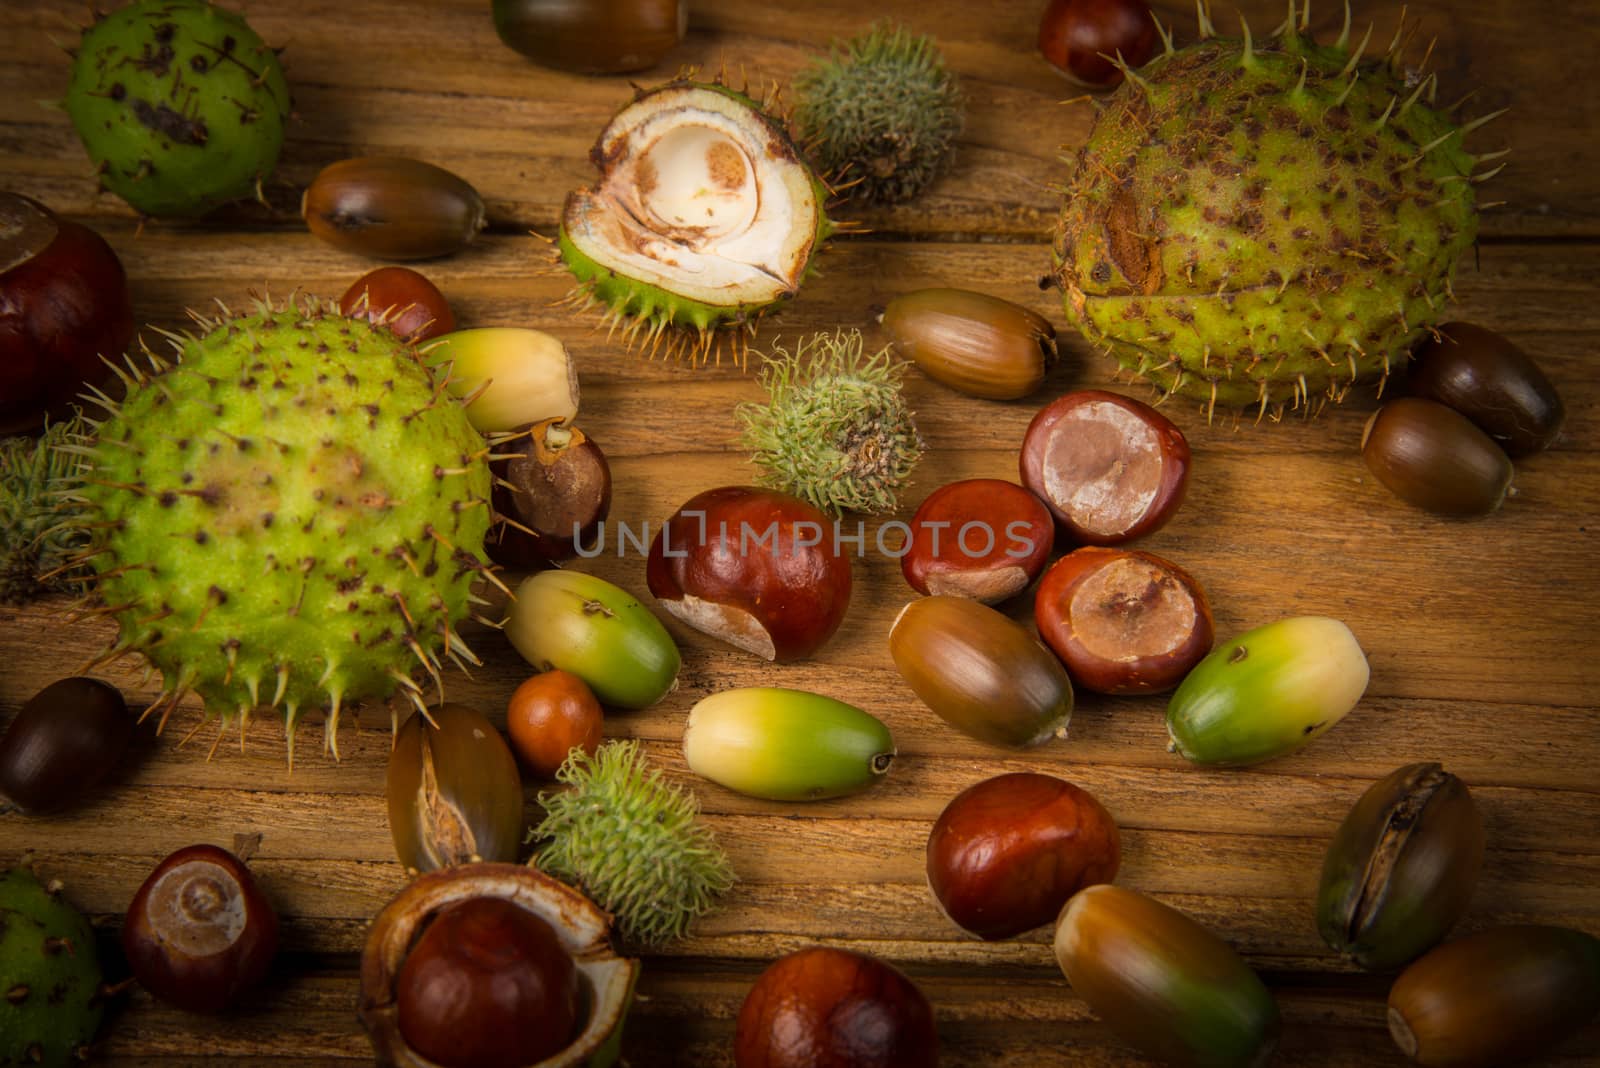 Autumn fruits of chestnut and acorn on wooden retro table in fall colours